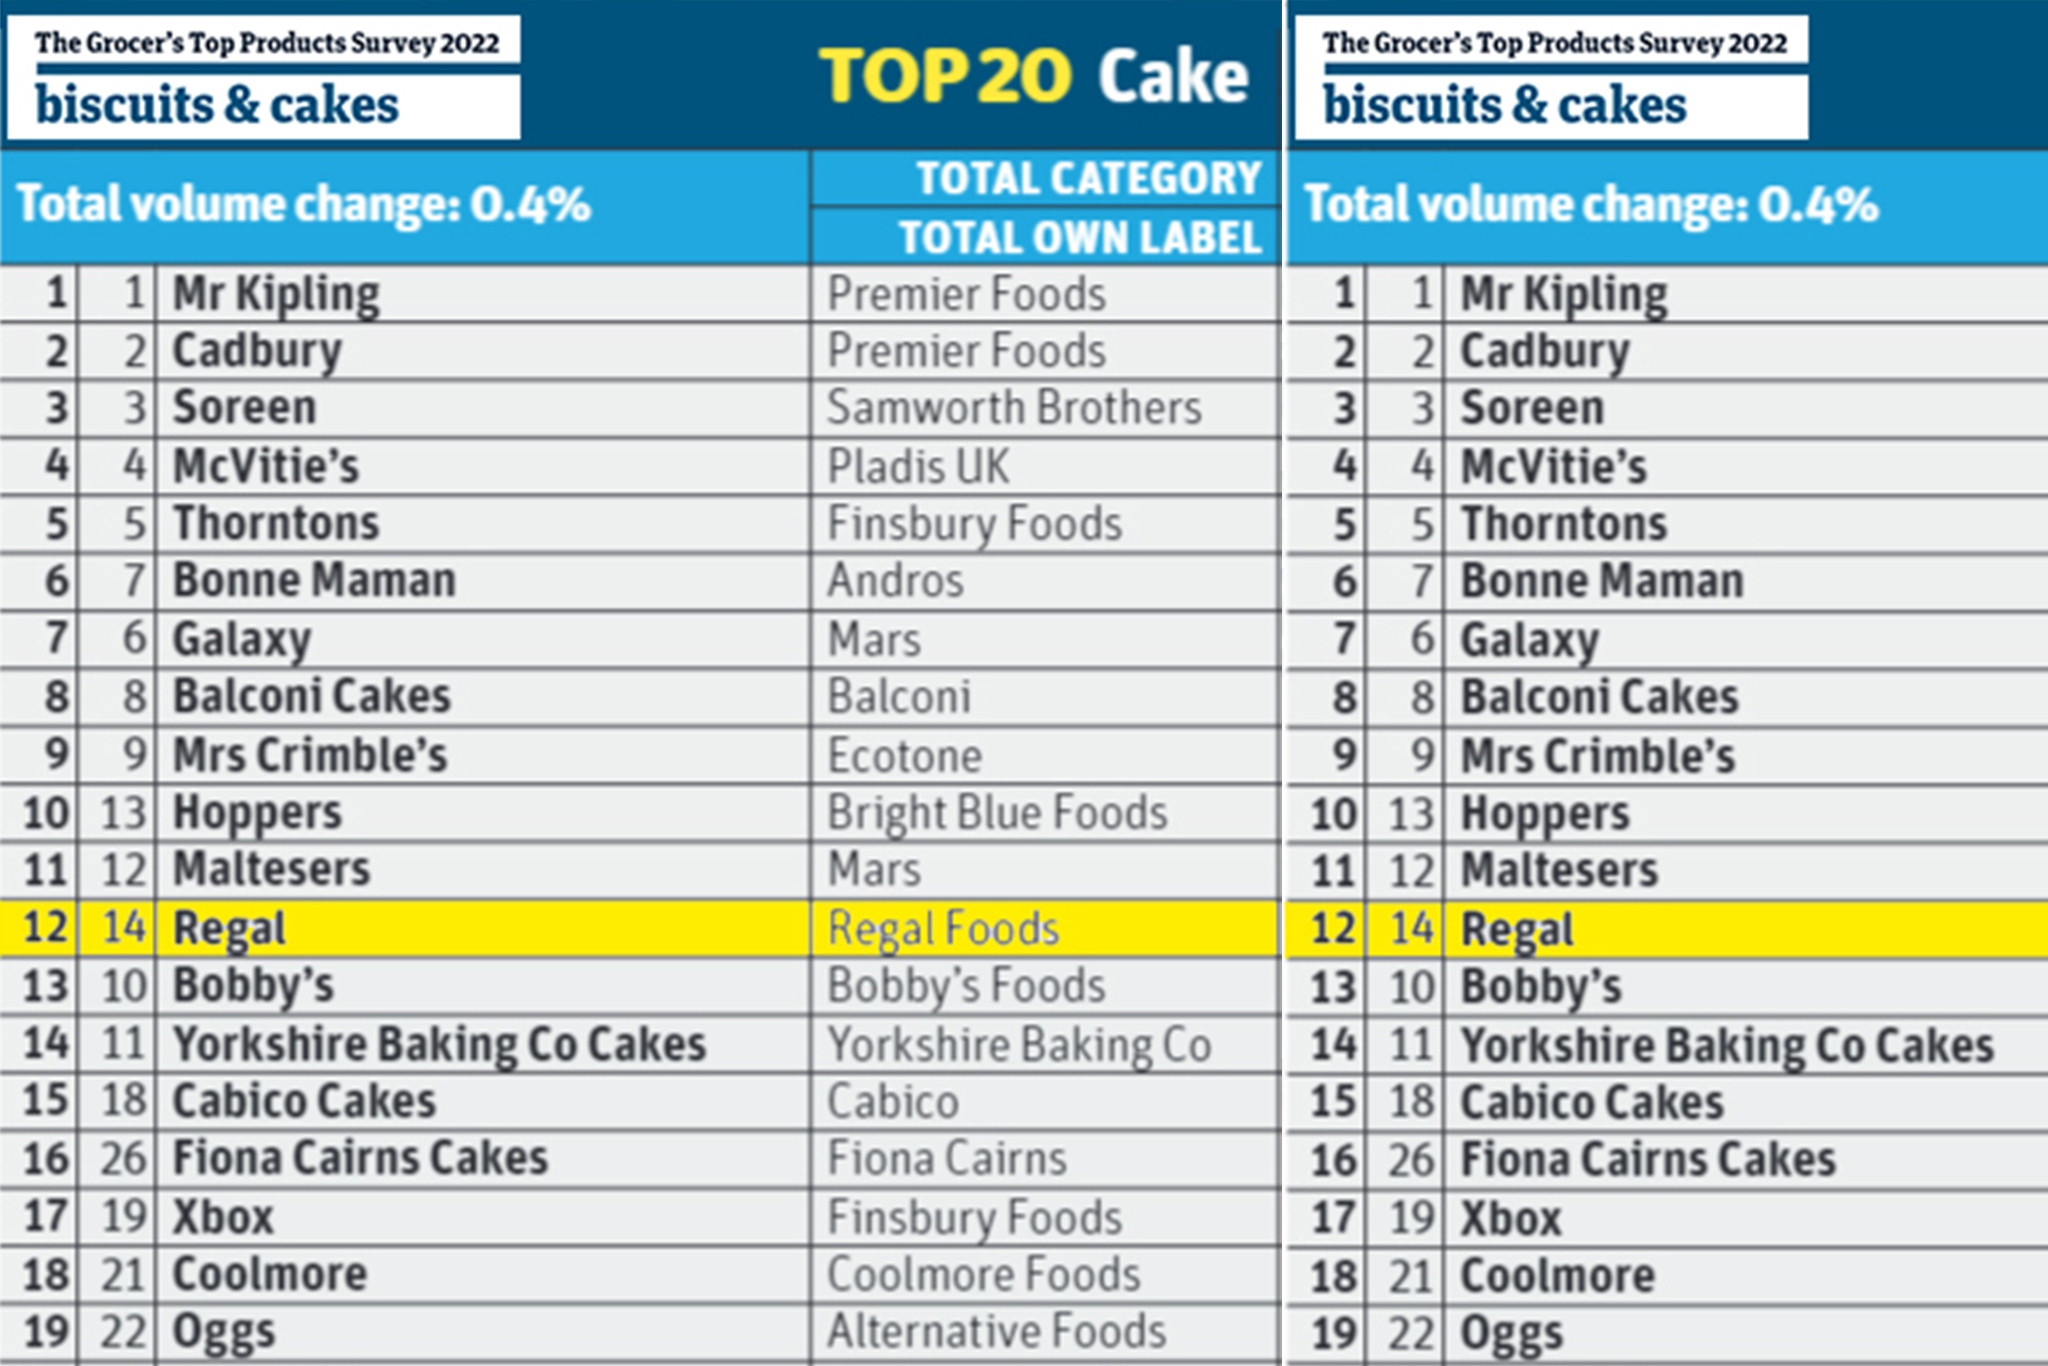 Regal crowned as Nation’s top cake & biscuit brand in The Grocer’s Top Products Survey 2022.